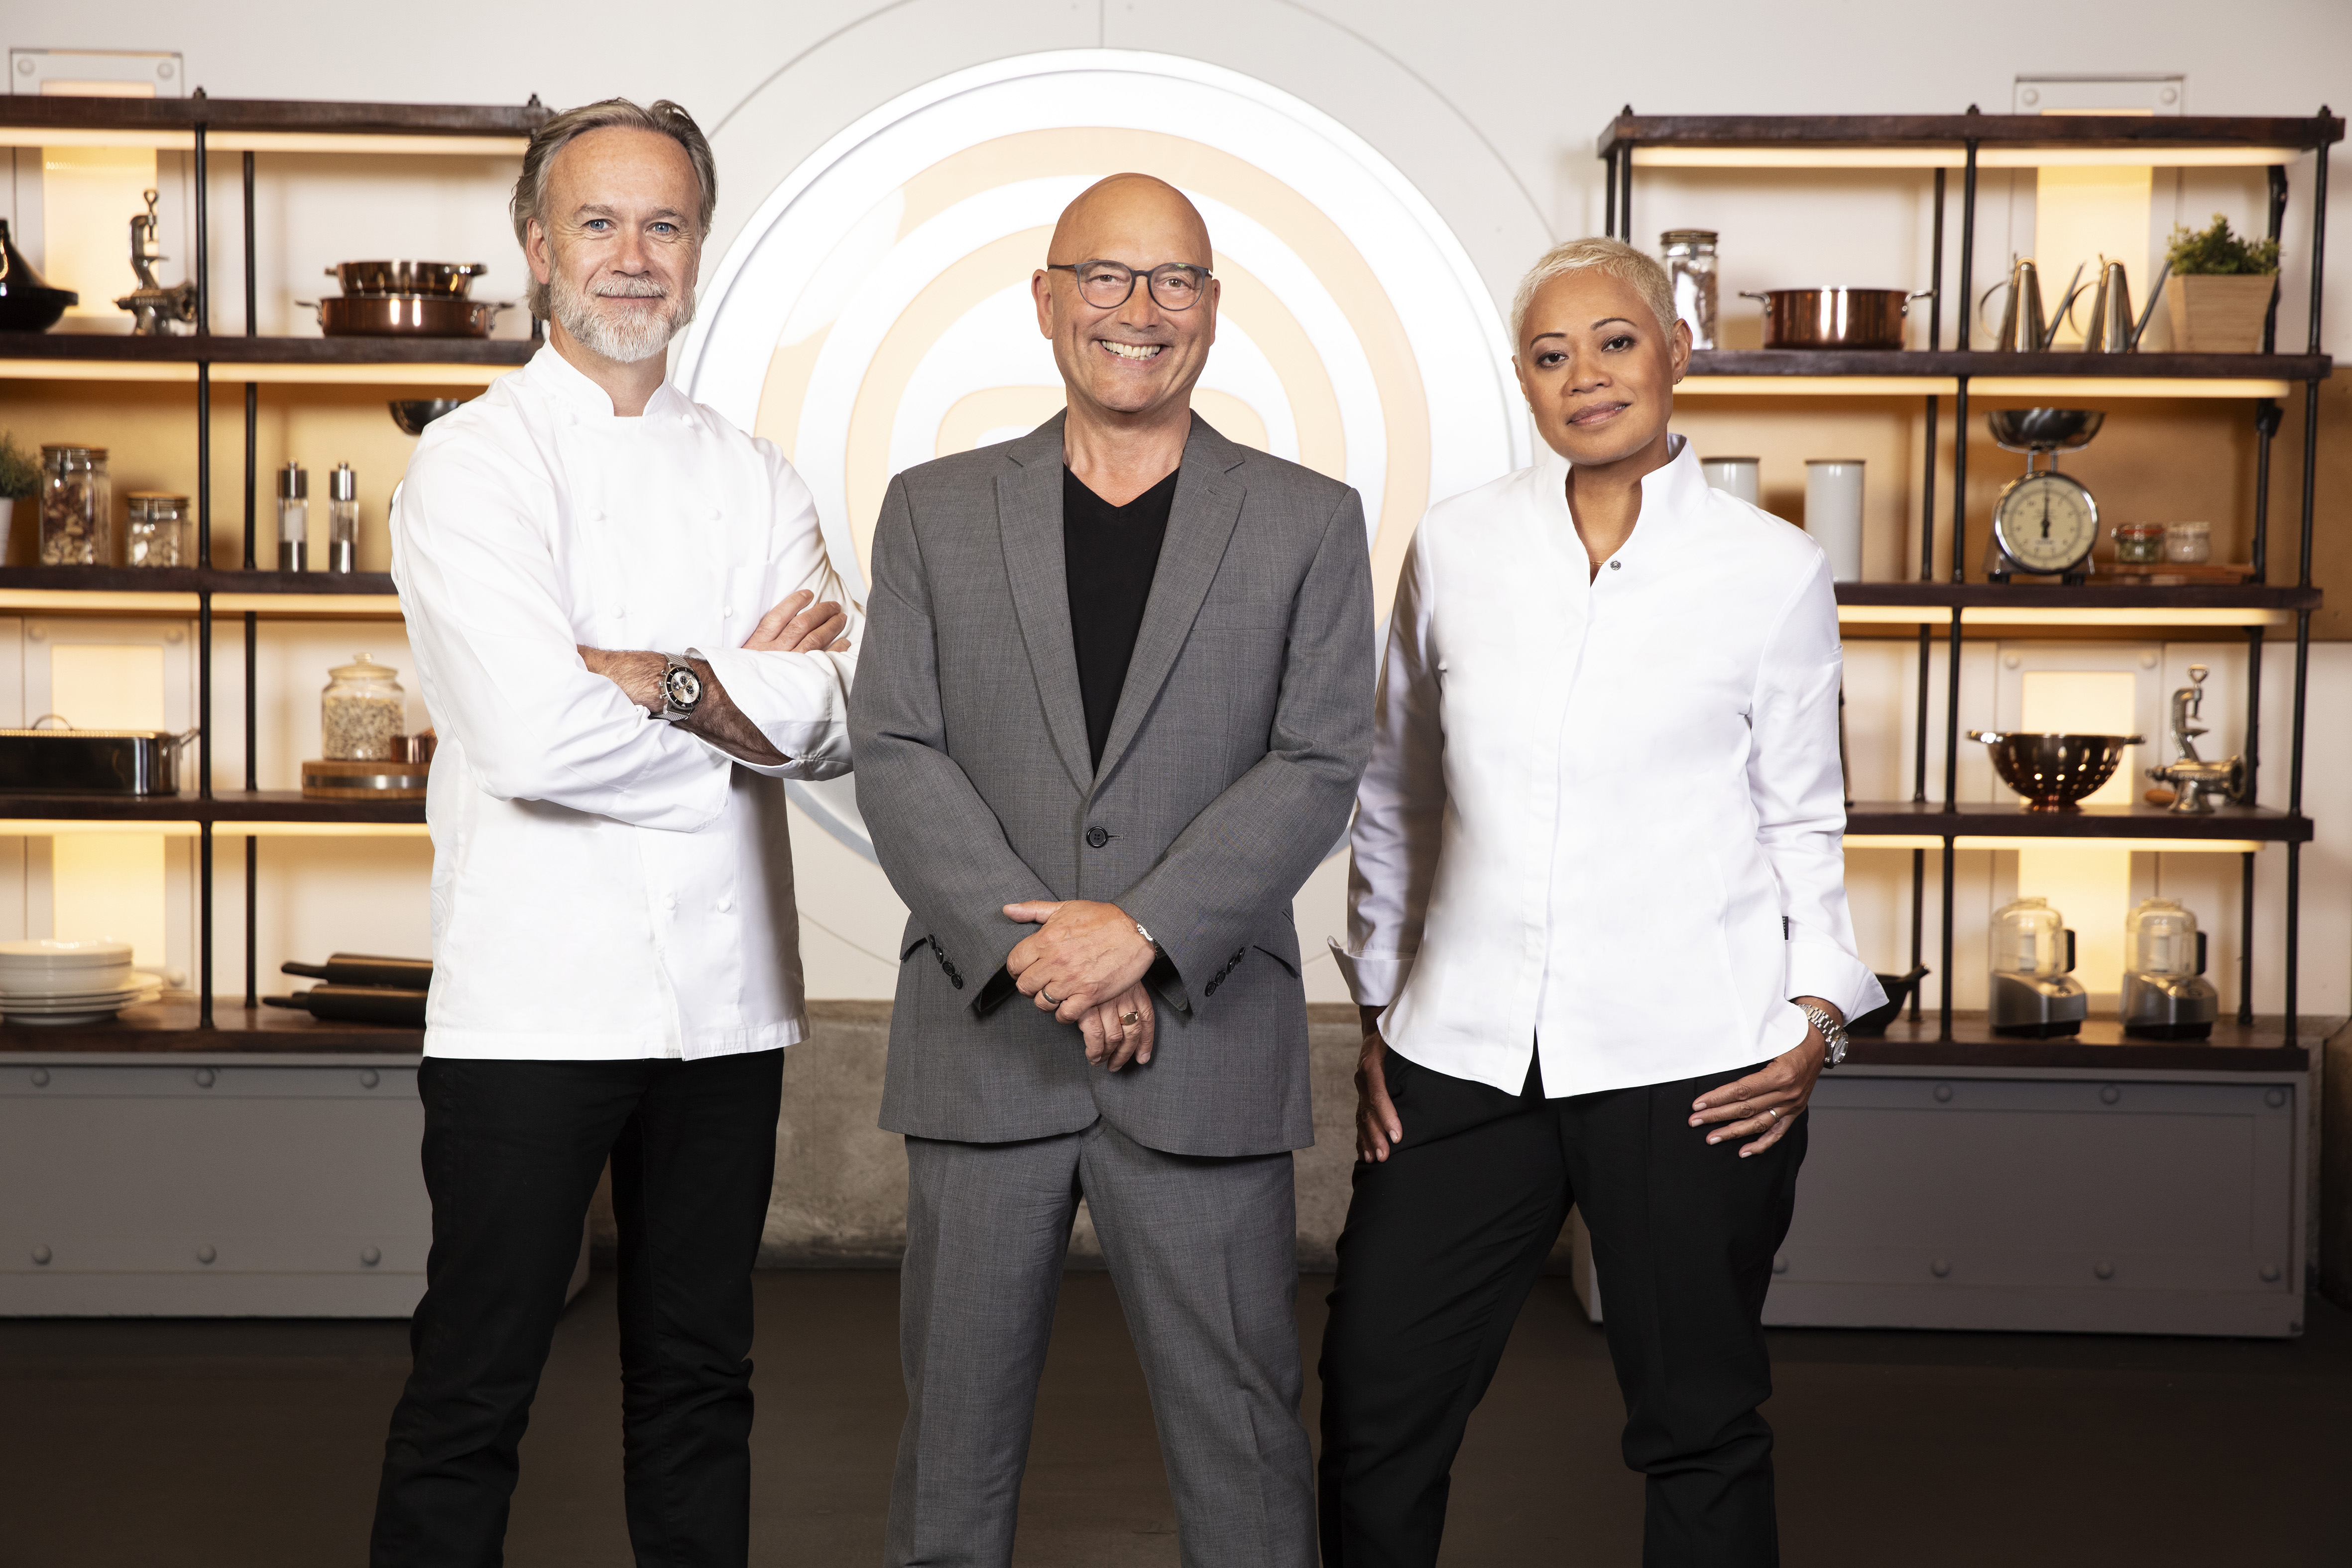 Marcus Wareing, Gregg Wallace and Monica Galetti from MasterChef